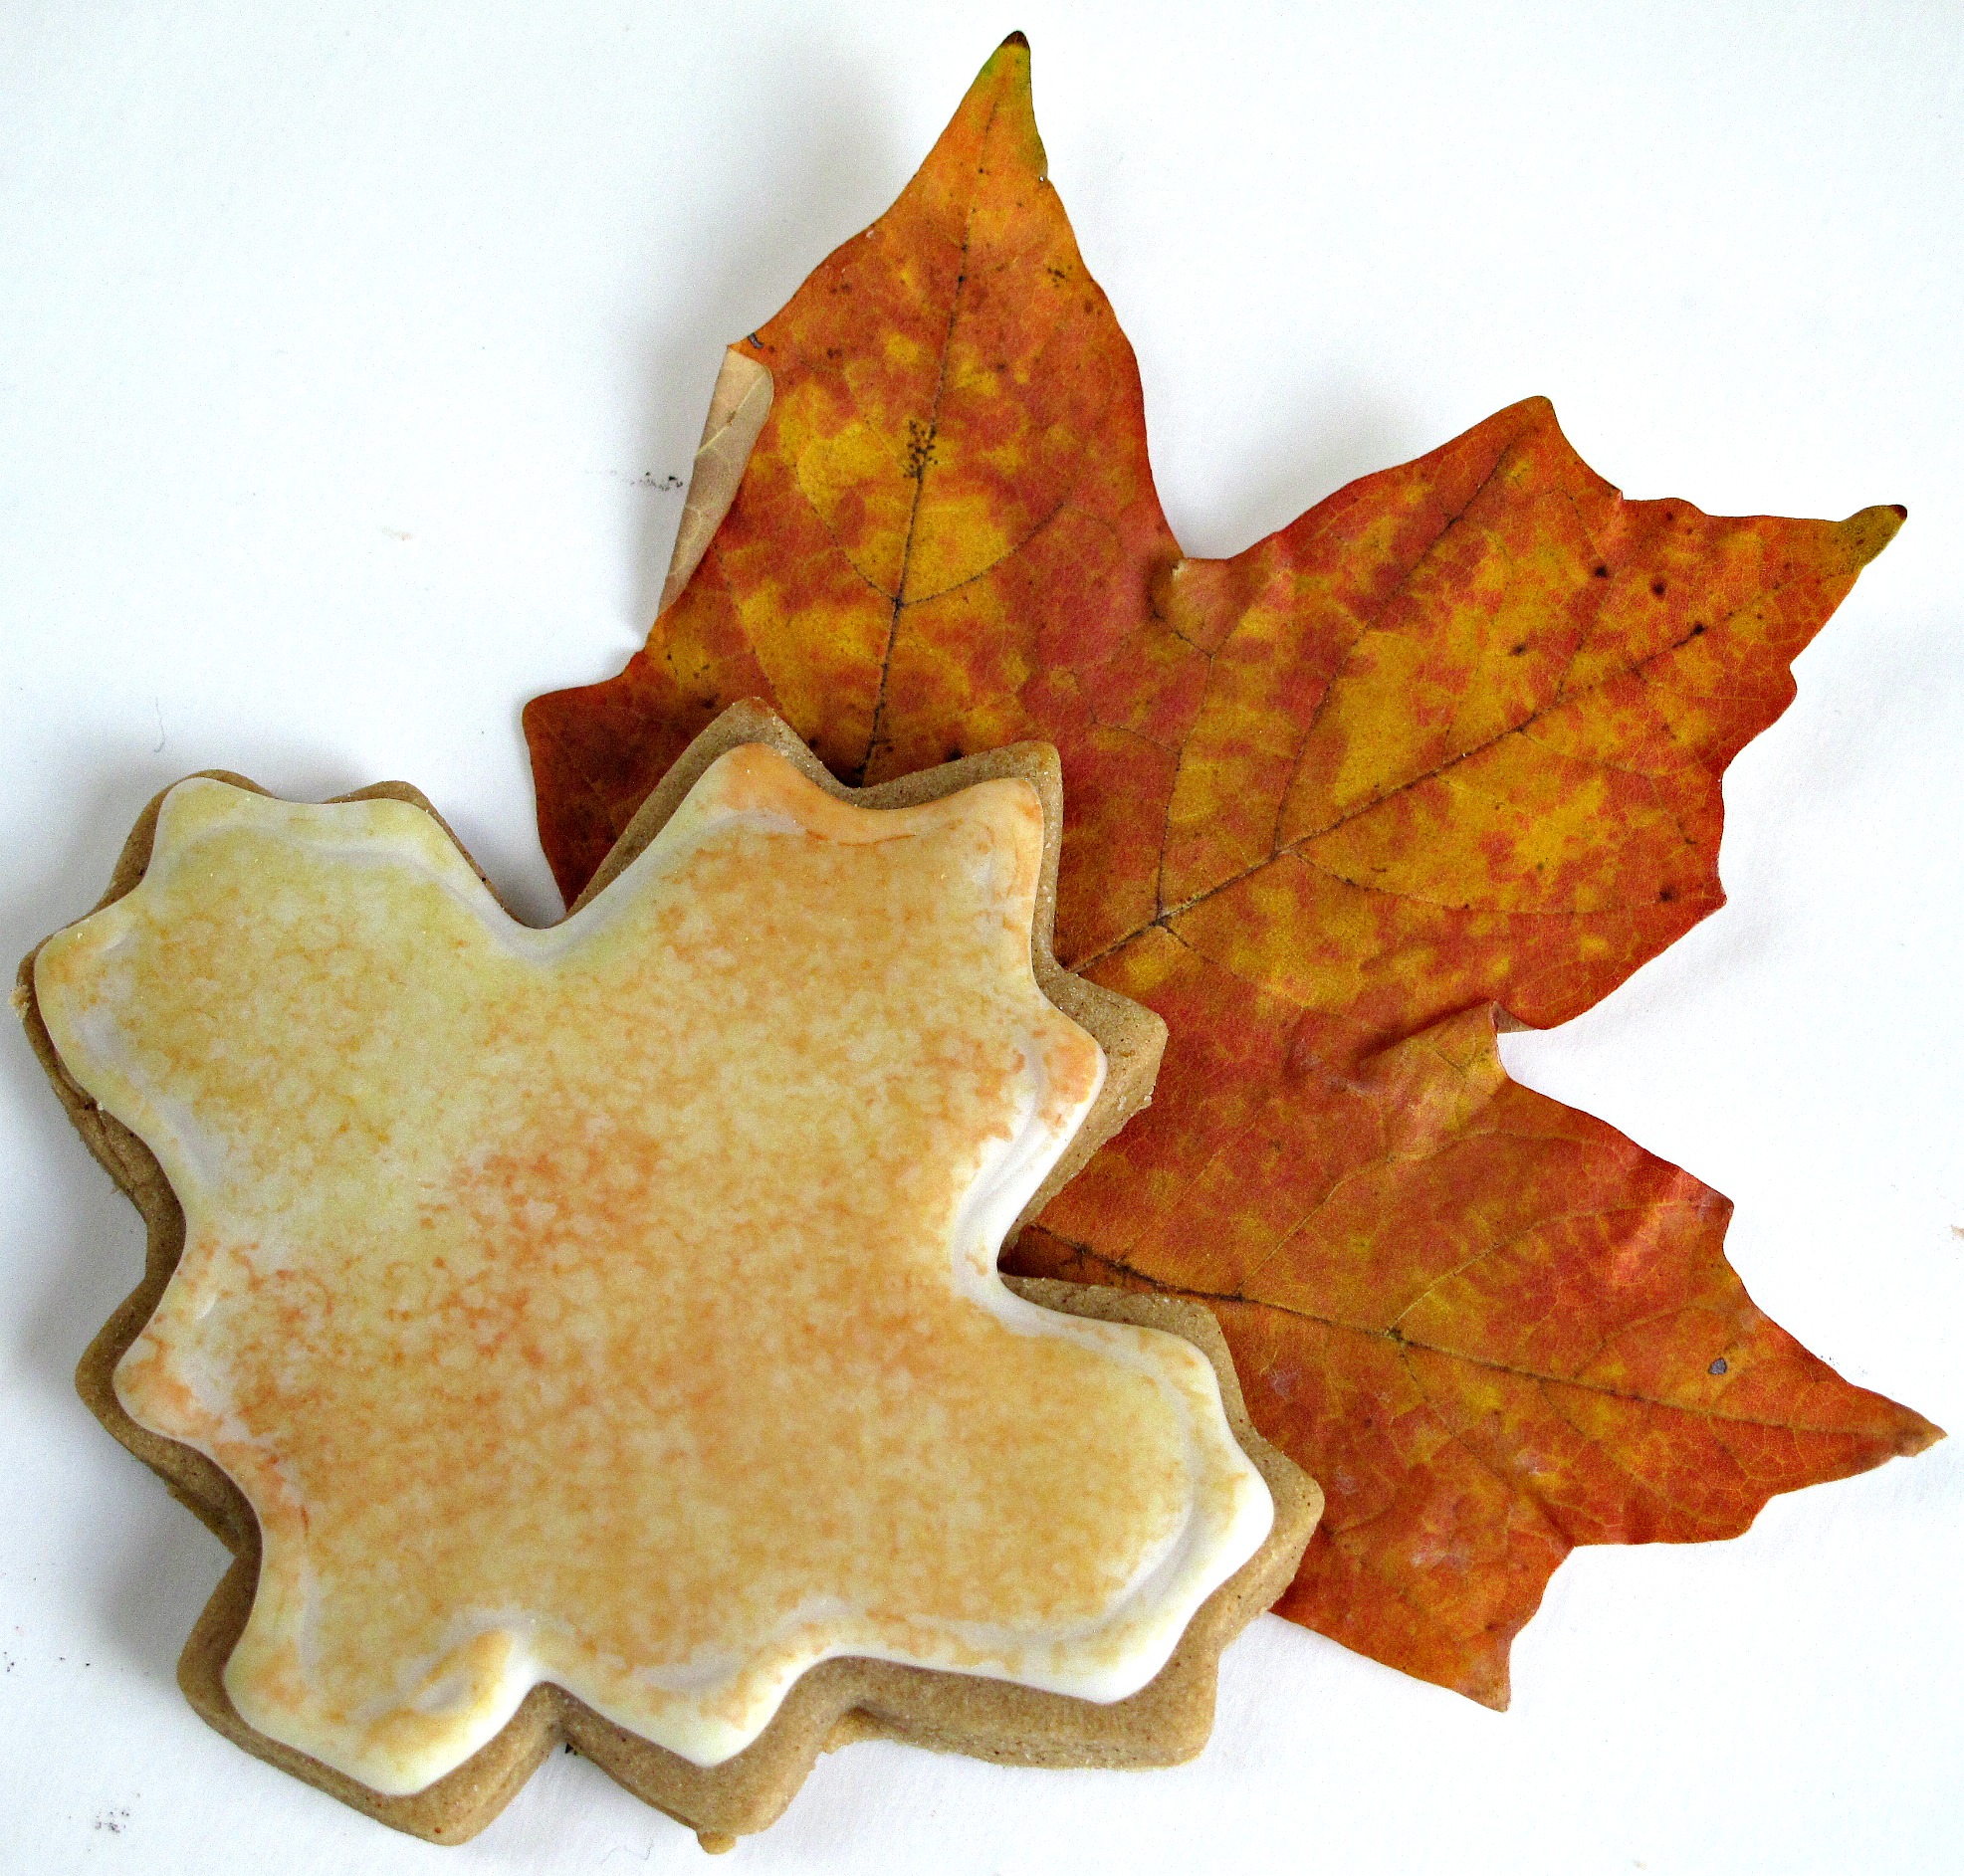 Gingerbread Fall Leaves - The Monday Box